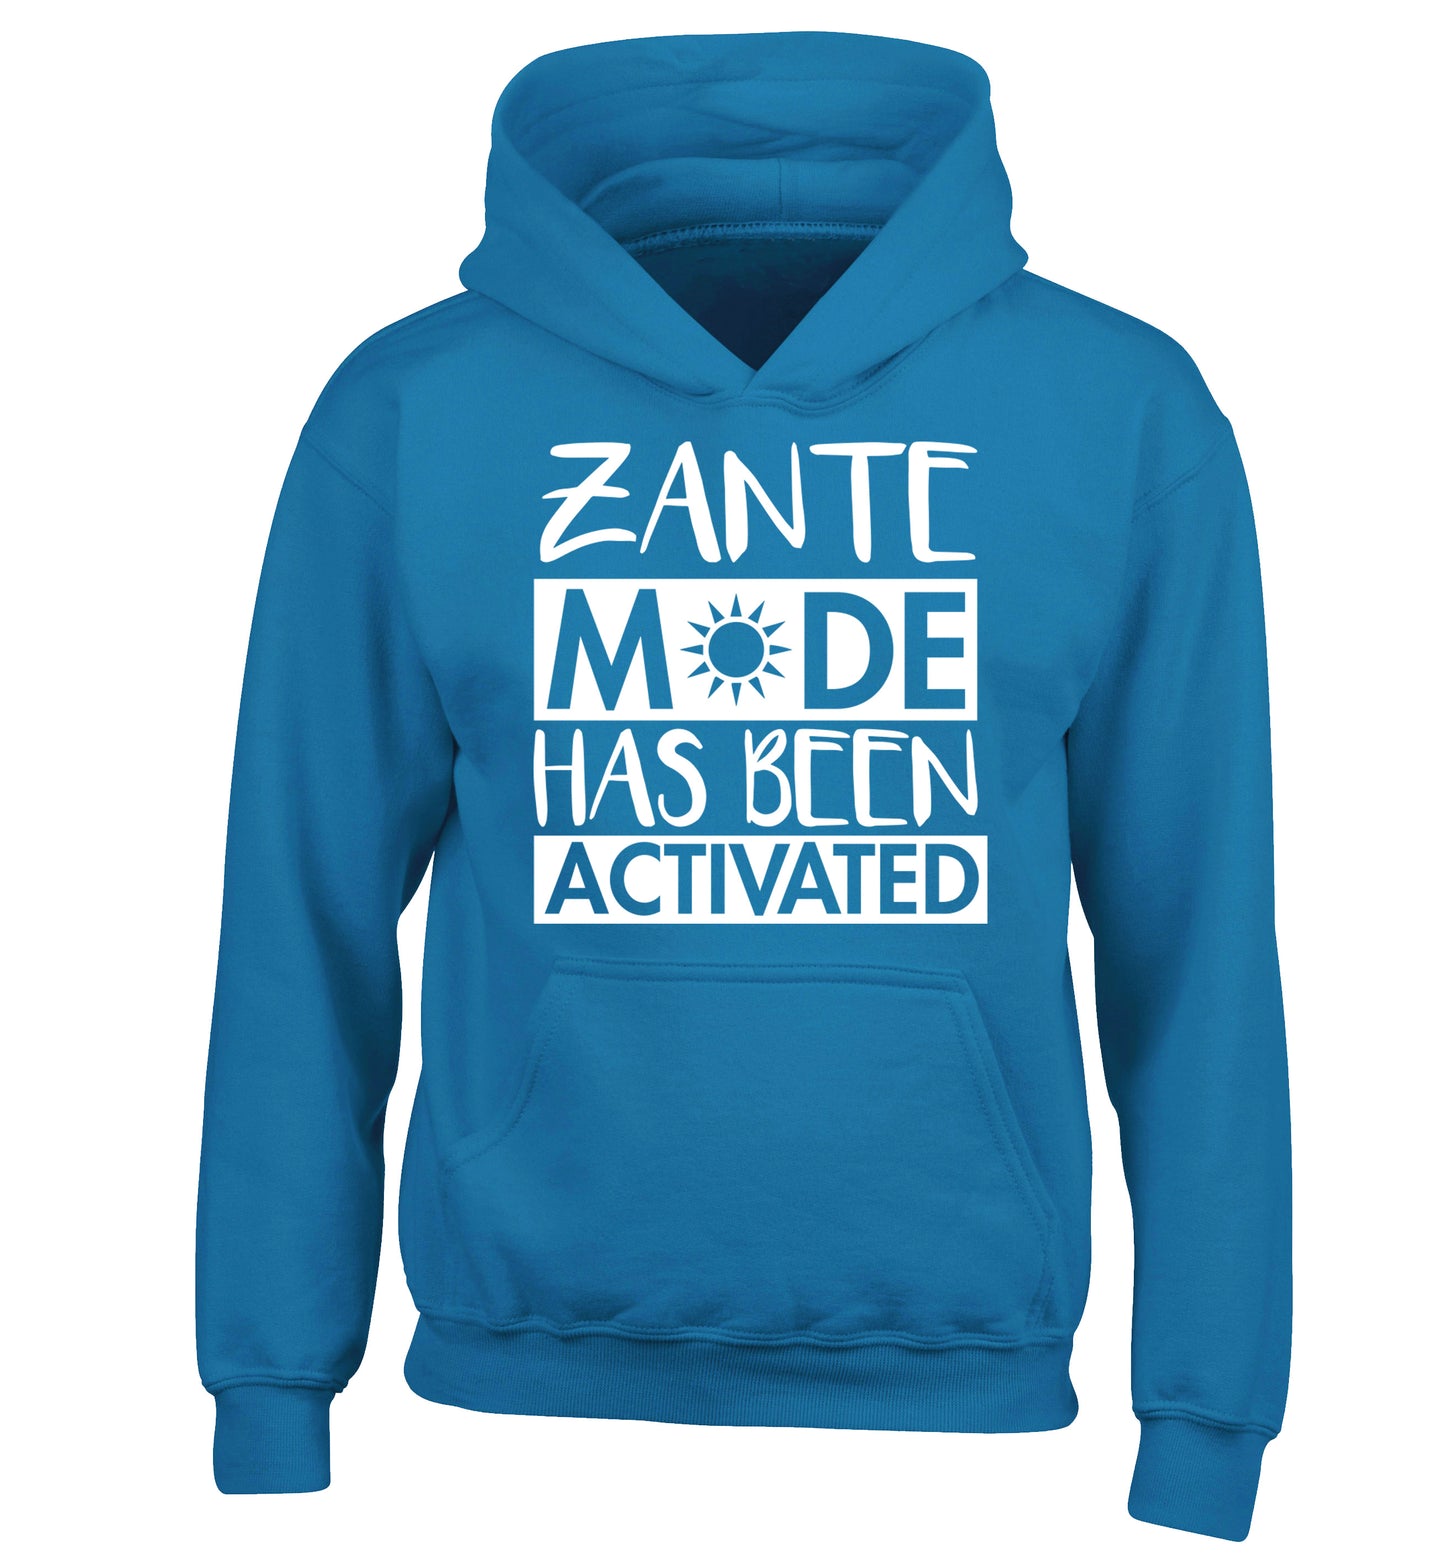 Zante mode has been activated children's blue hoodie 12-13 Years